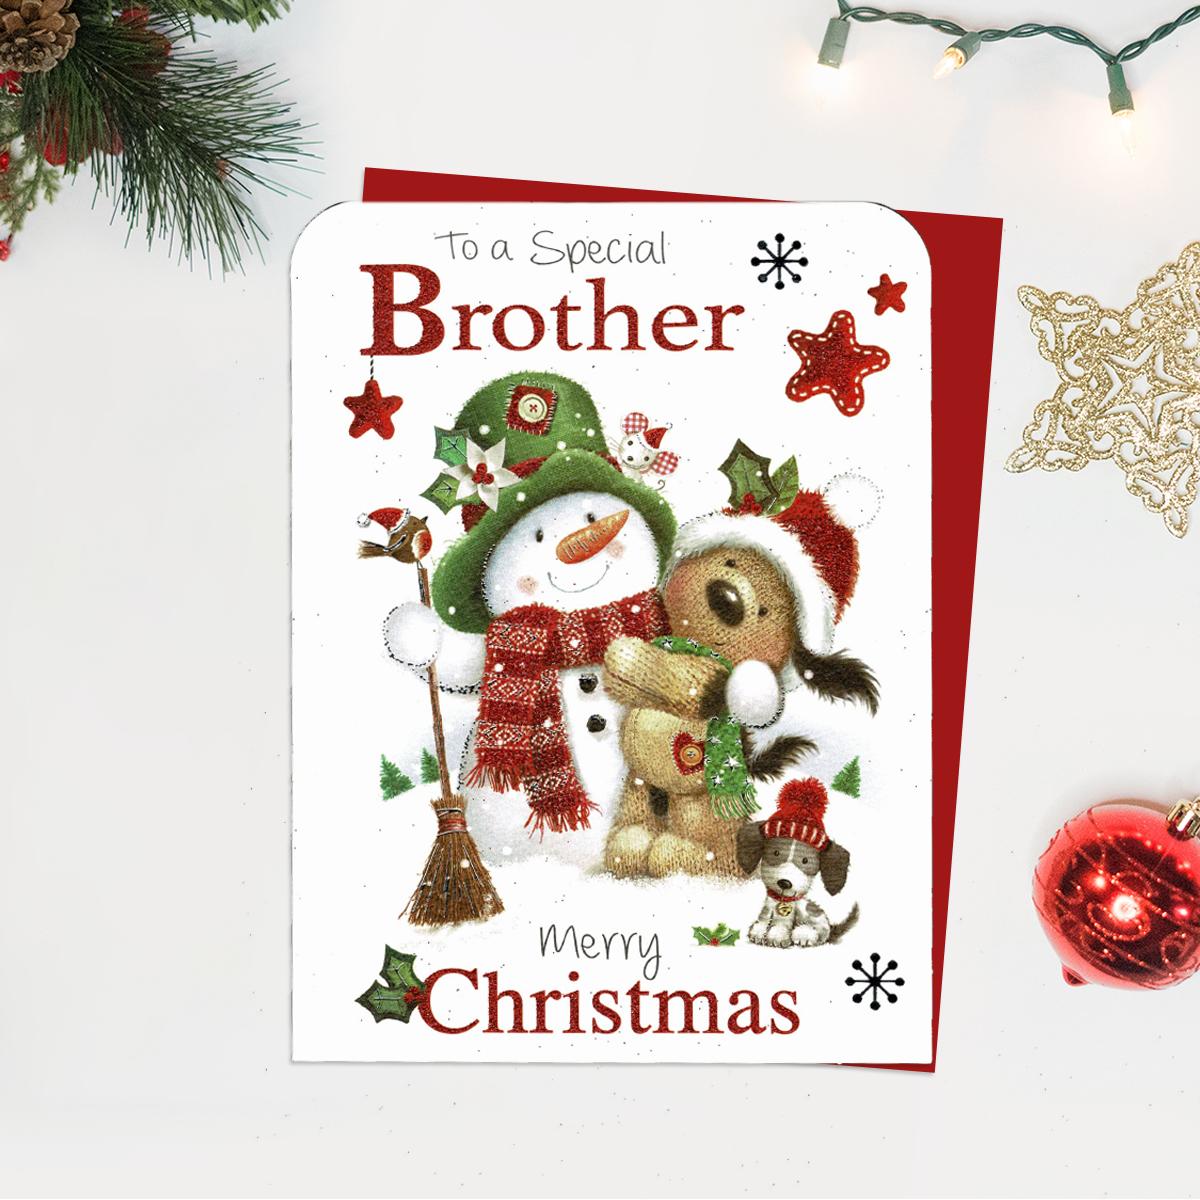 Special Brother Shows A Snowman And Friends. Finished With Red Glitter And Red Envelope